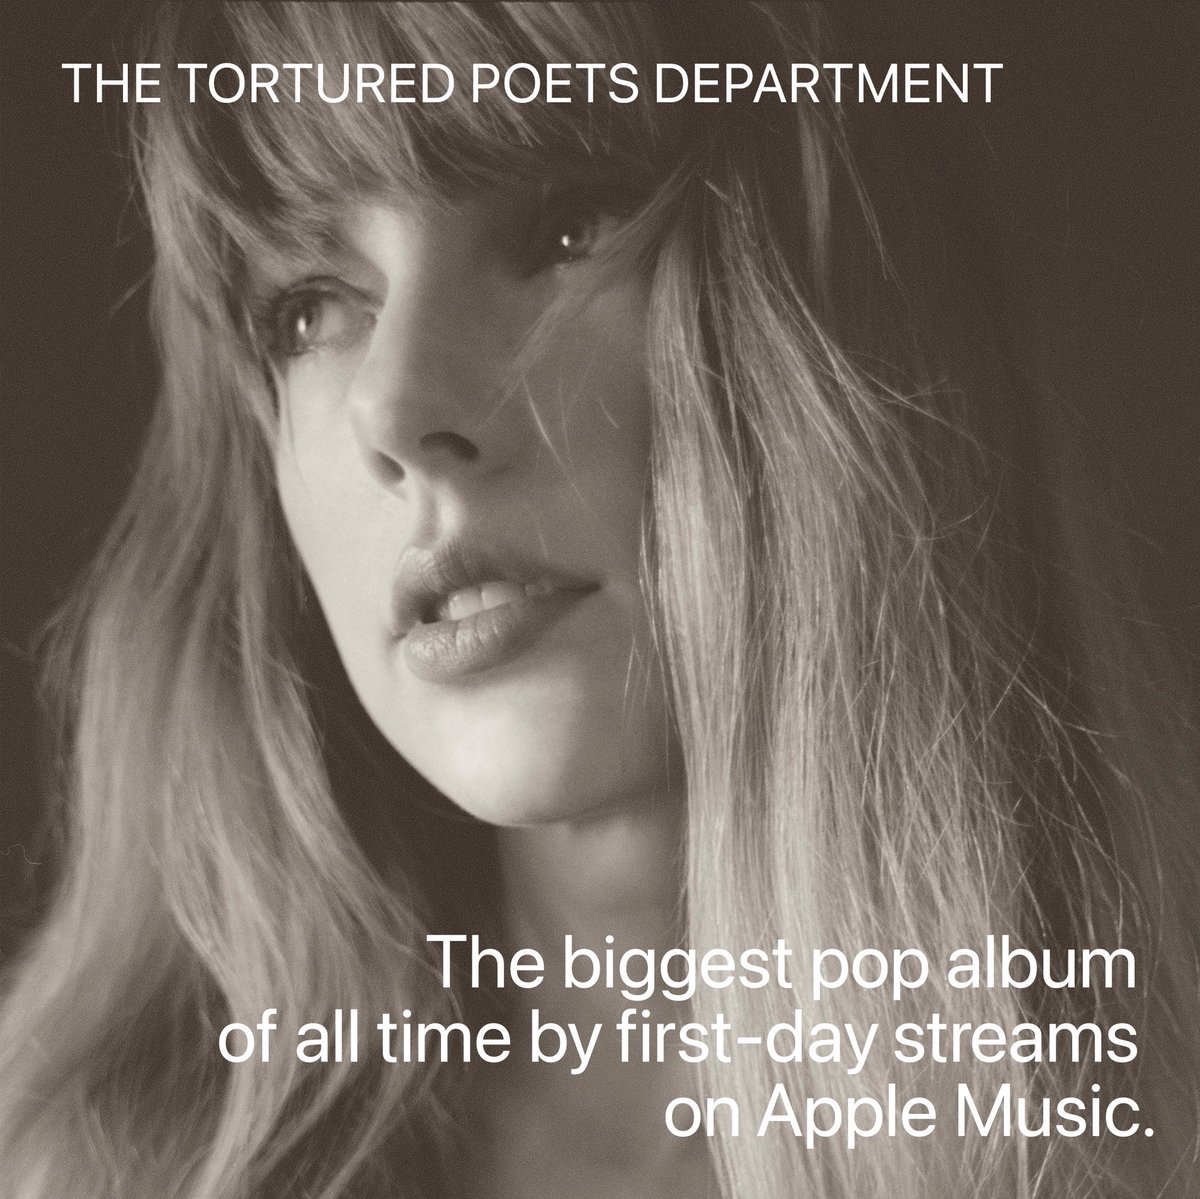 High enrollment numbers for @taylorswift13’s THE TORTURED POETS DEPARTMENT! 🤯 The album broke the record for biggest pop album of all time by first-day streams on Apple Music. apple.co/TSTTPDA #TSTTPD